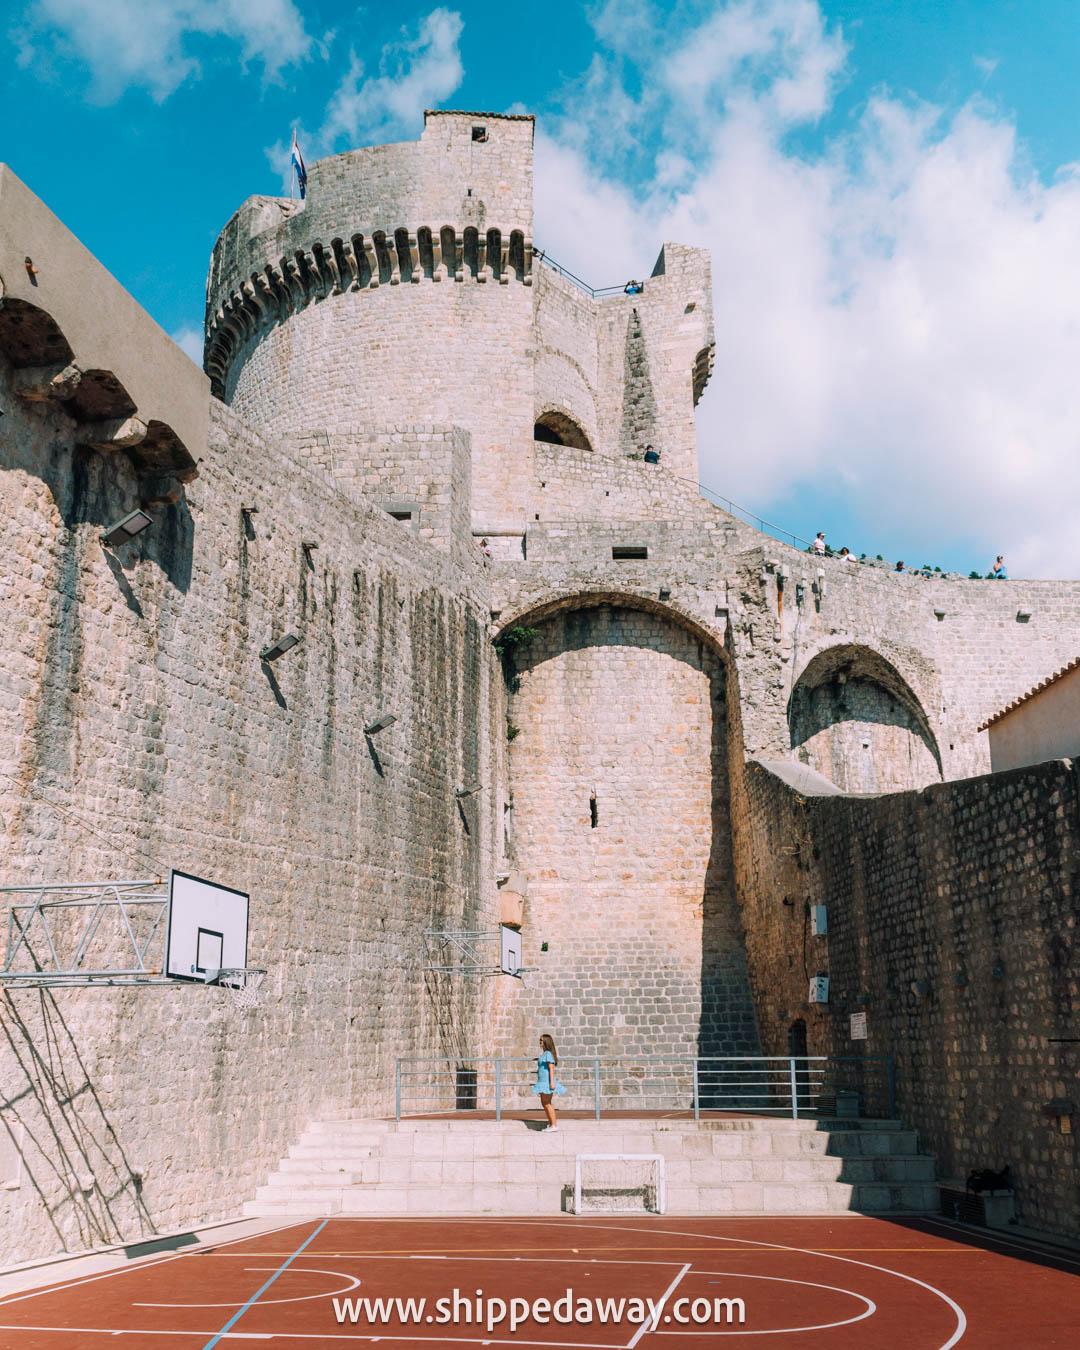 minčeta fortress dubrovnik, dubrovnik basketball court, dubrovnik city walls, dubrovnik old town, dubrovnik things to do, how many days to stay in dubrovnik